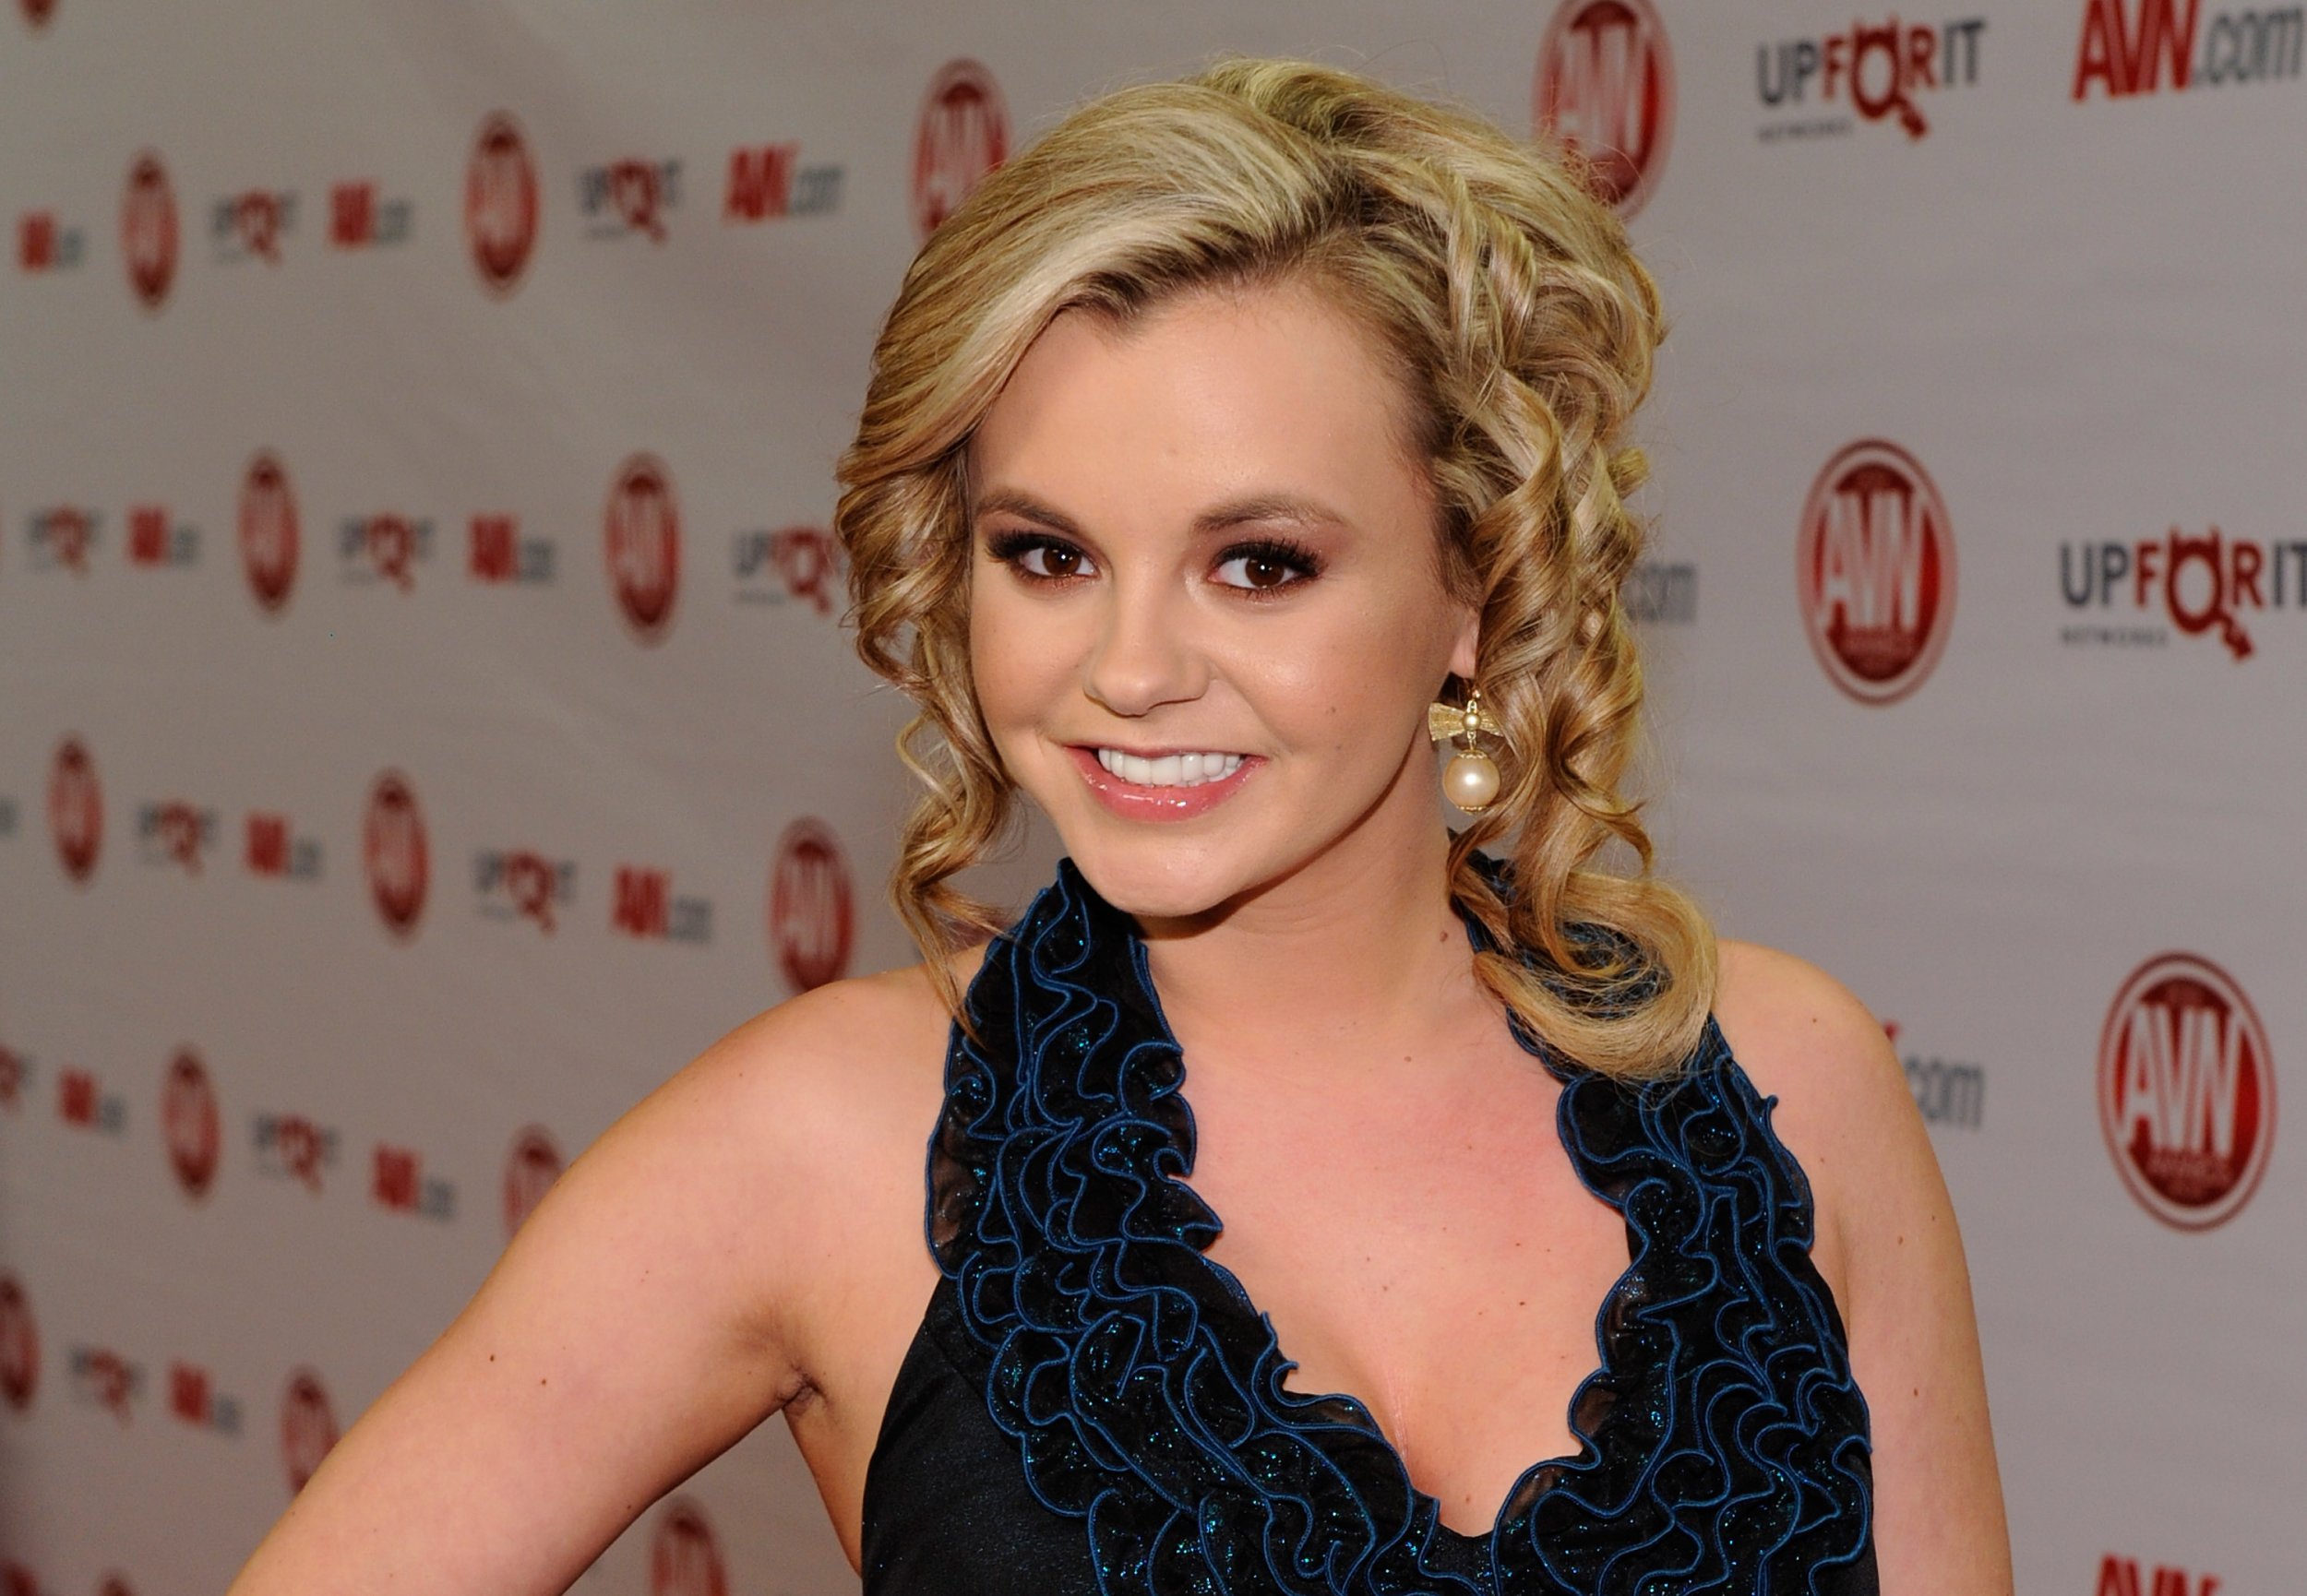 desmond andrews recommends bree olson howard stern pic